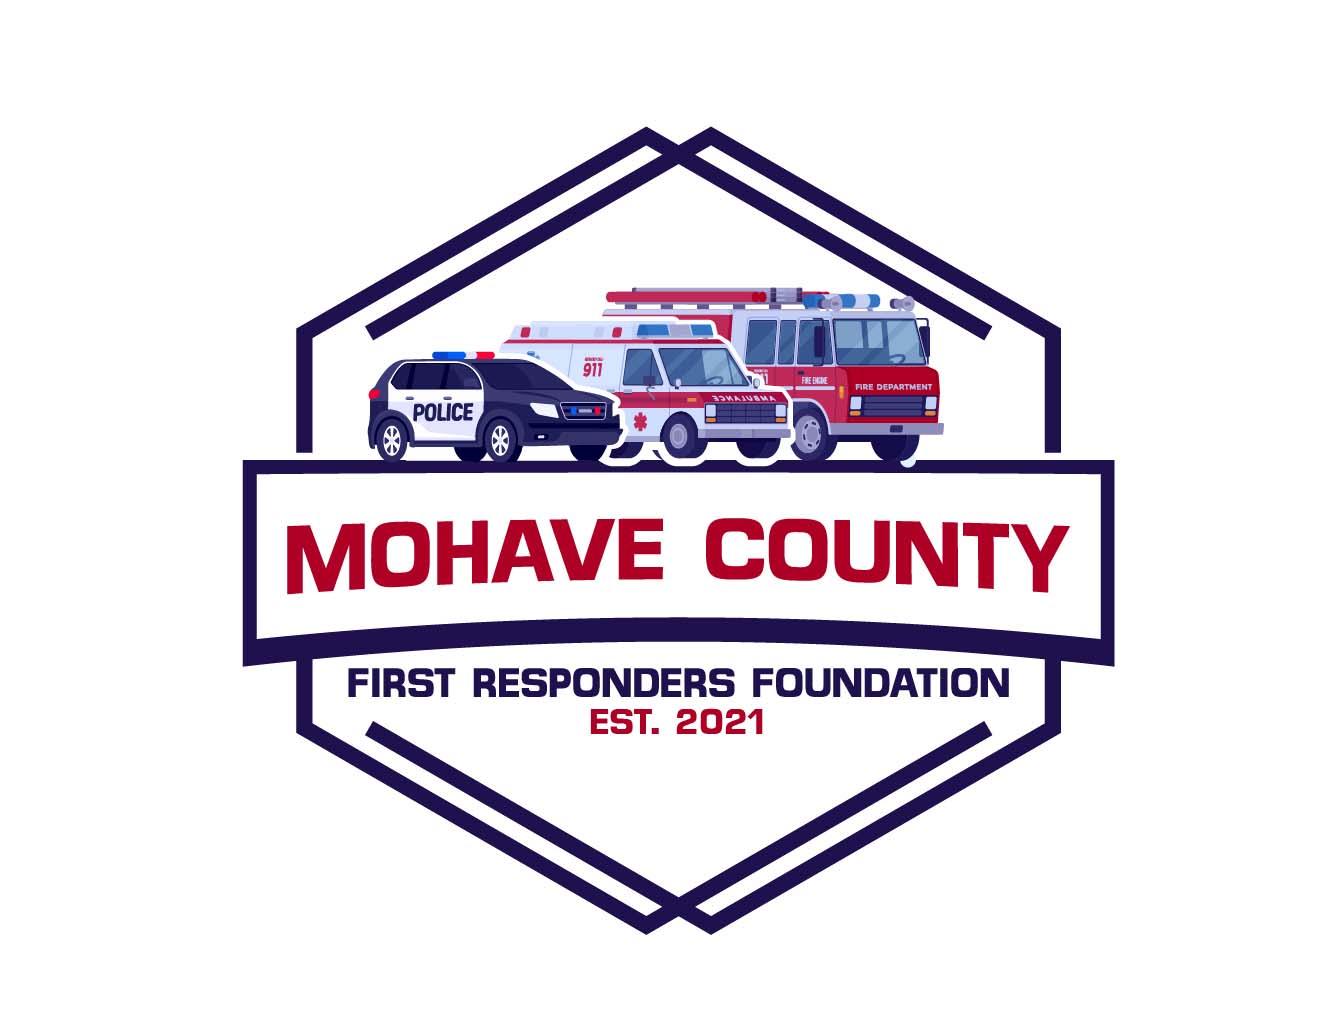 Mohave County First Responders Foundation